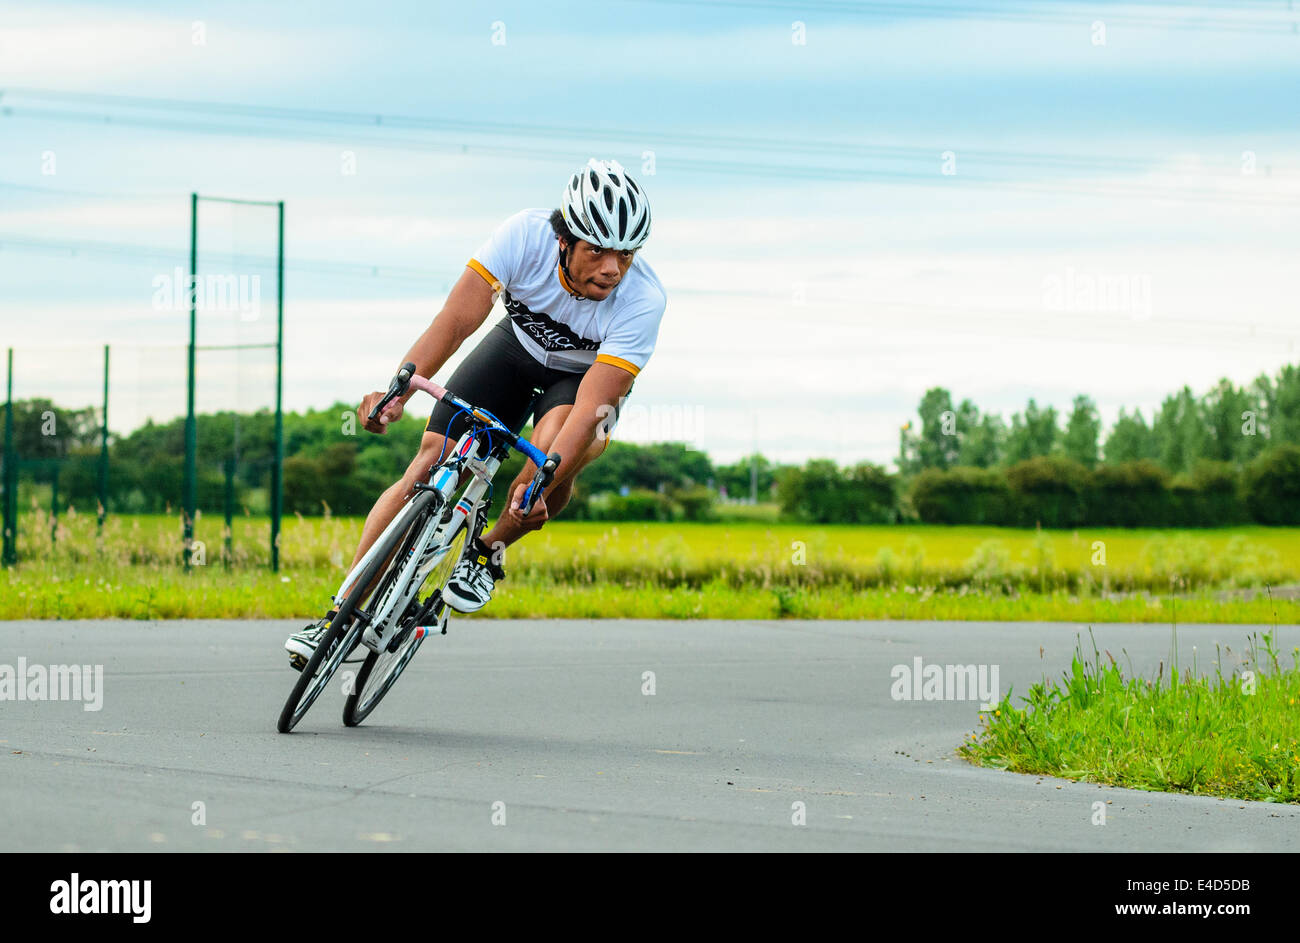 Cyclist racing in criterium event on dedicated cycle circuit at York Sport Village York Yorkshire Stock Photo